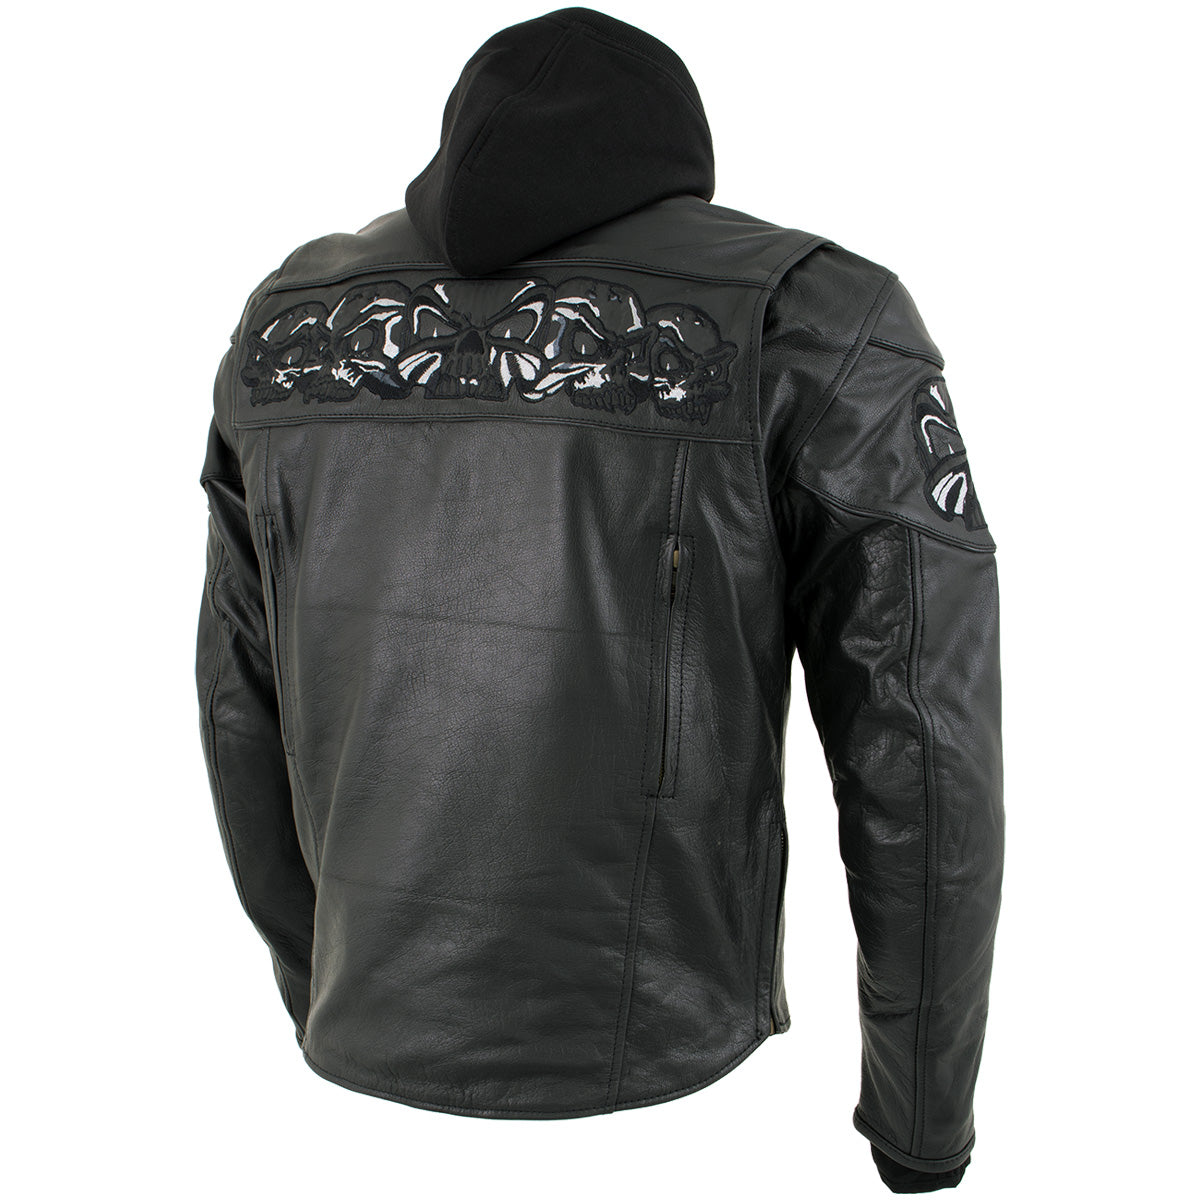 Xelement XS1504 Men's ‘Futile’ Black Leather CE Armored Motorcycle Hooded Jacket with Reflective Skulls